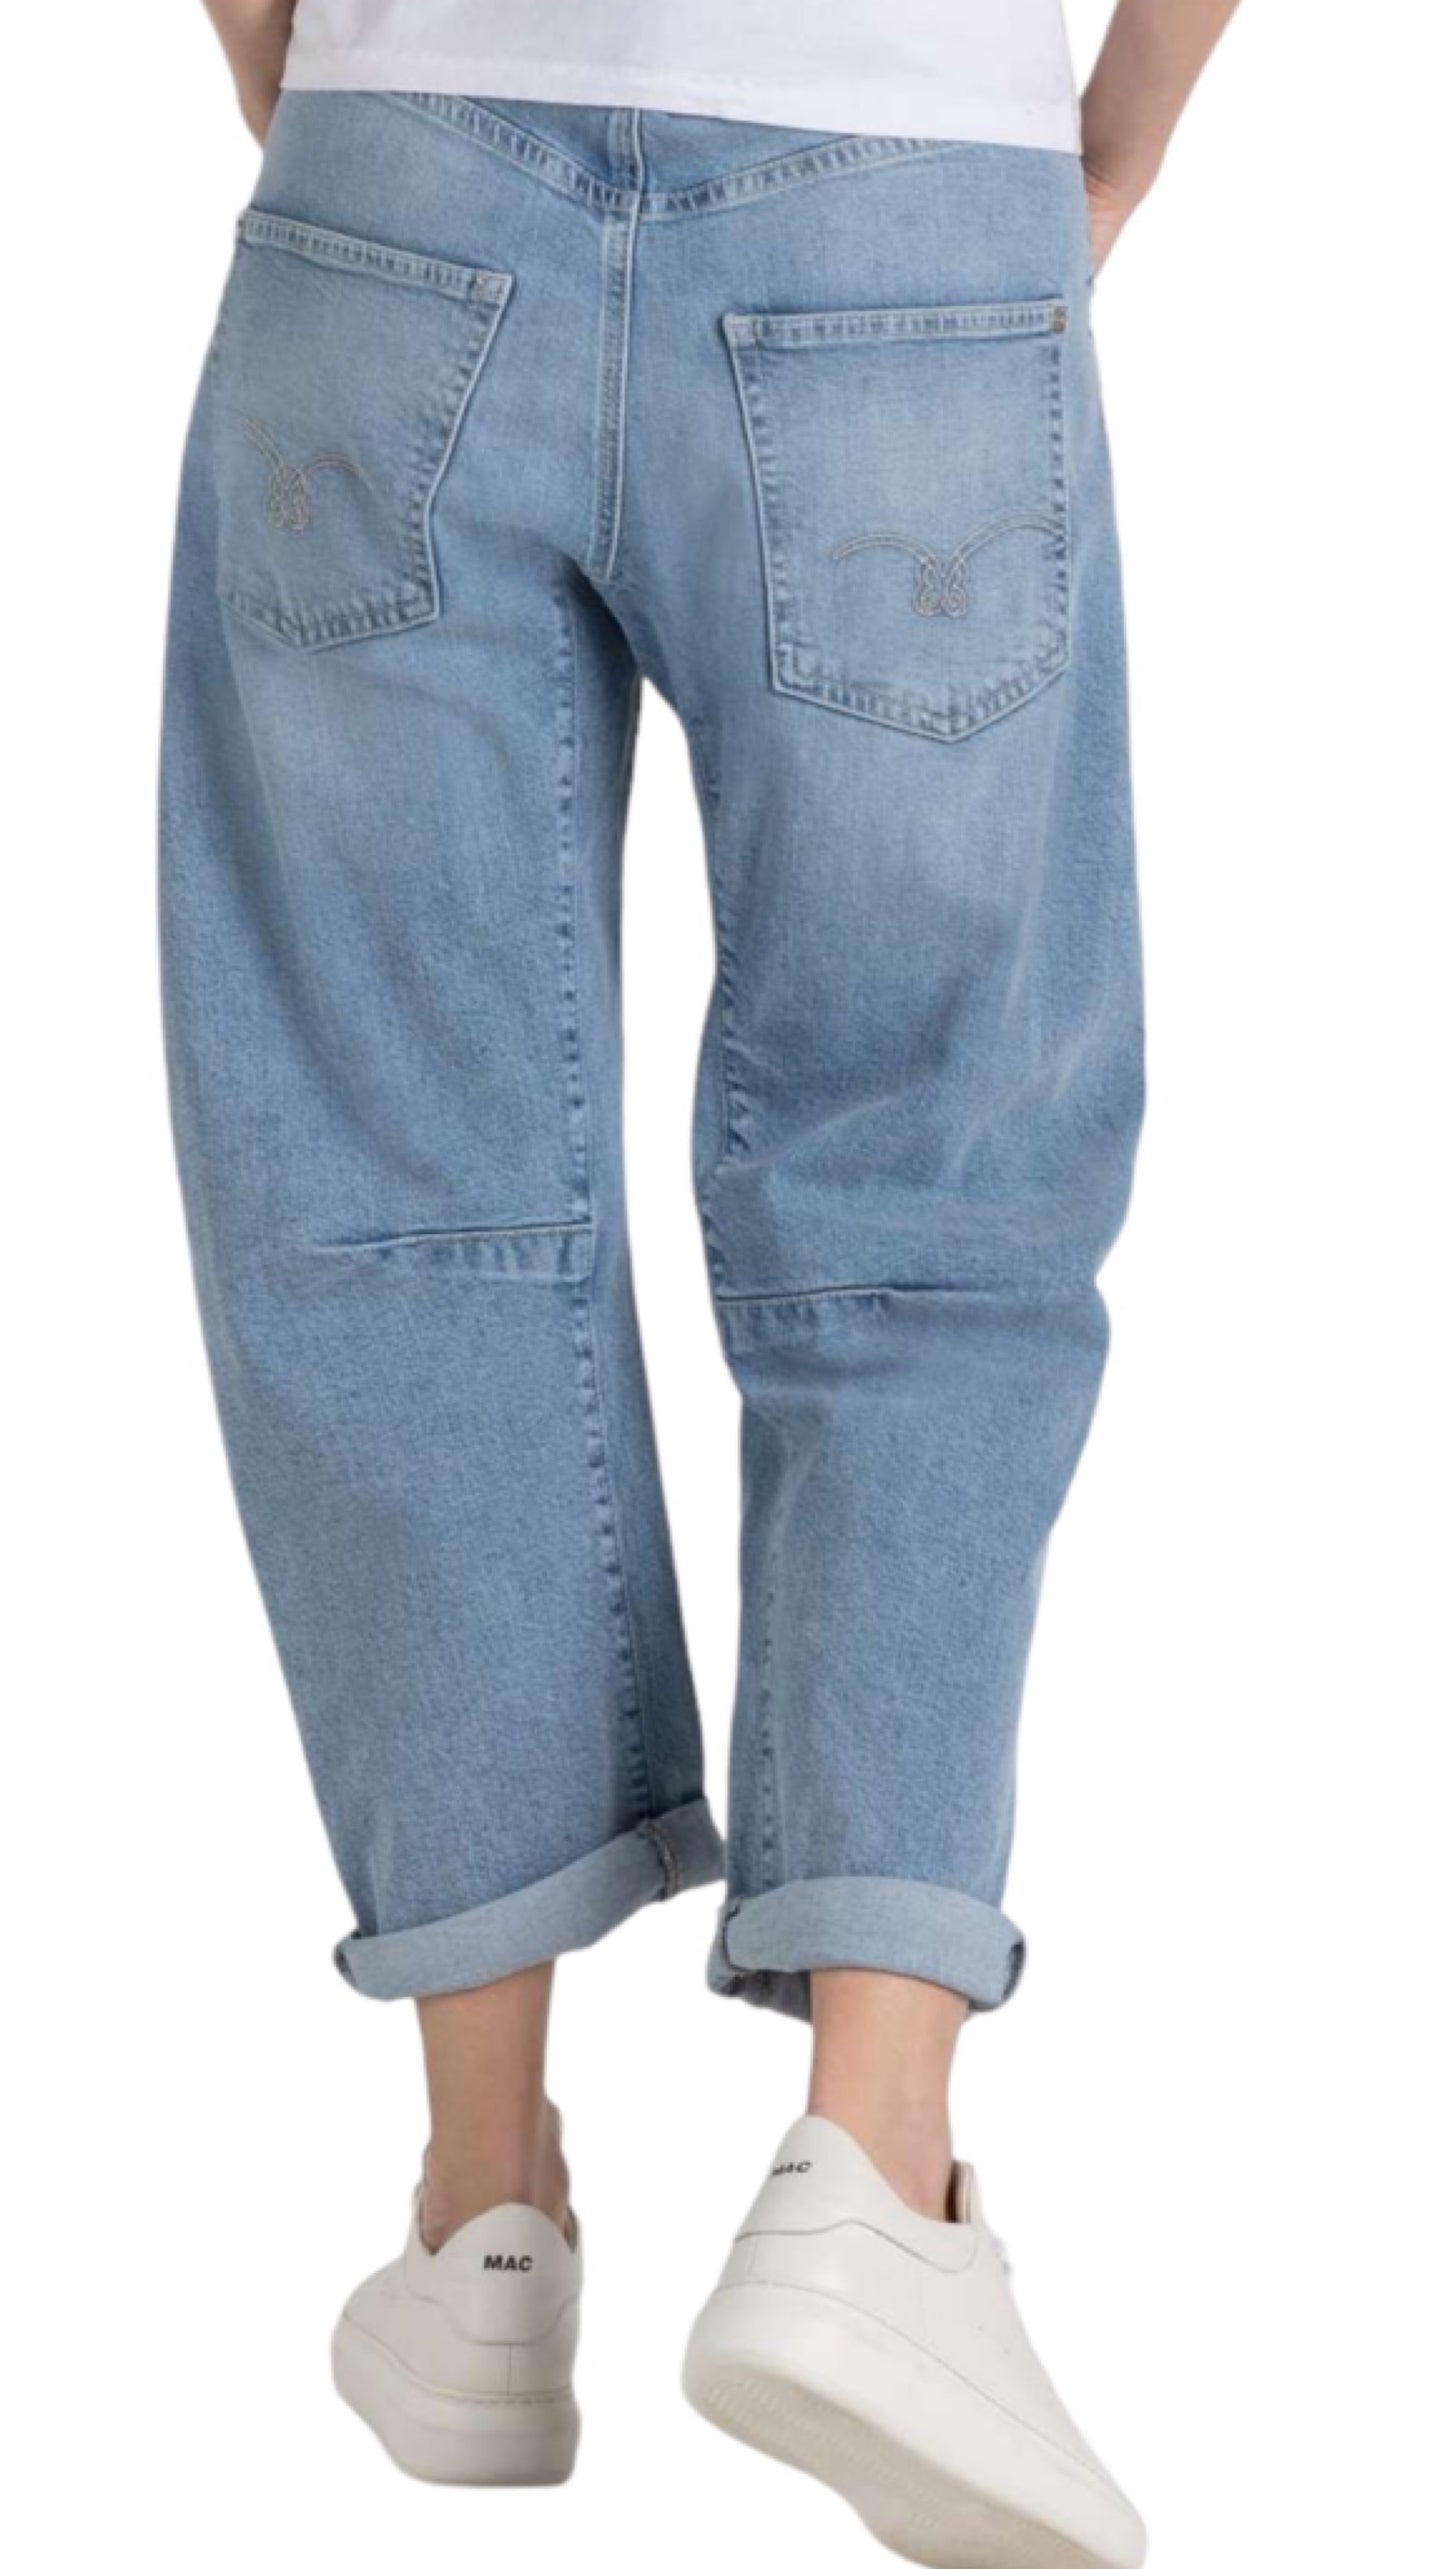 Baggy cargo glam jeans